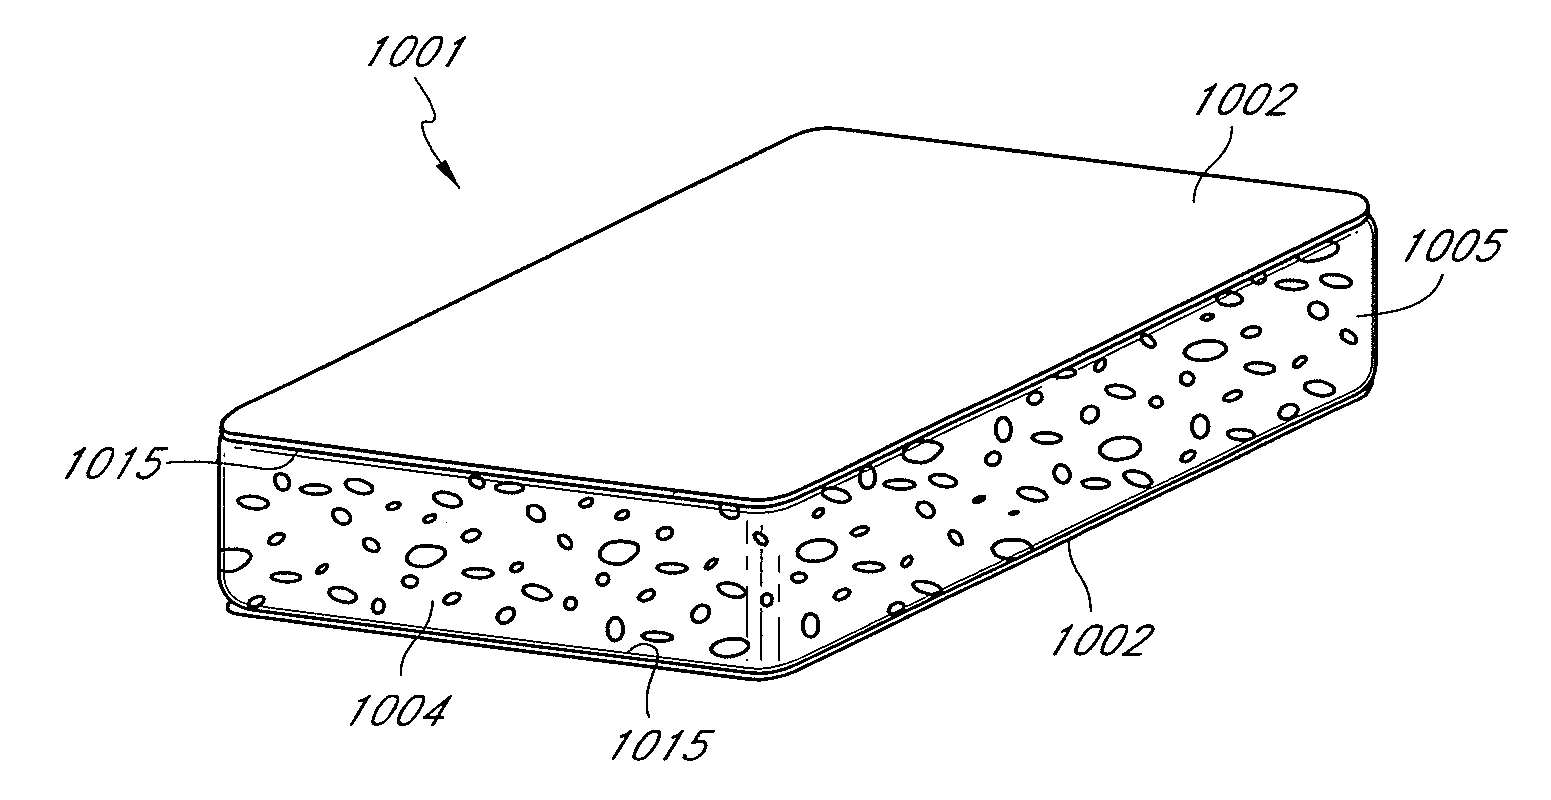 Porous implant with effective extensibility and methods of forming an implant